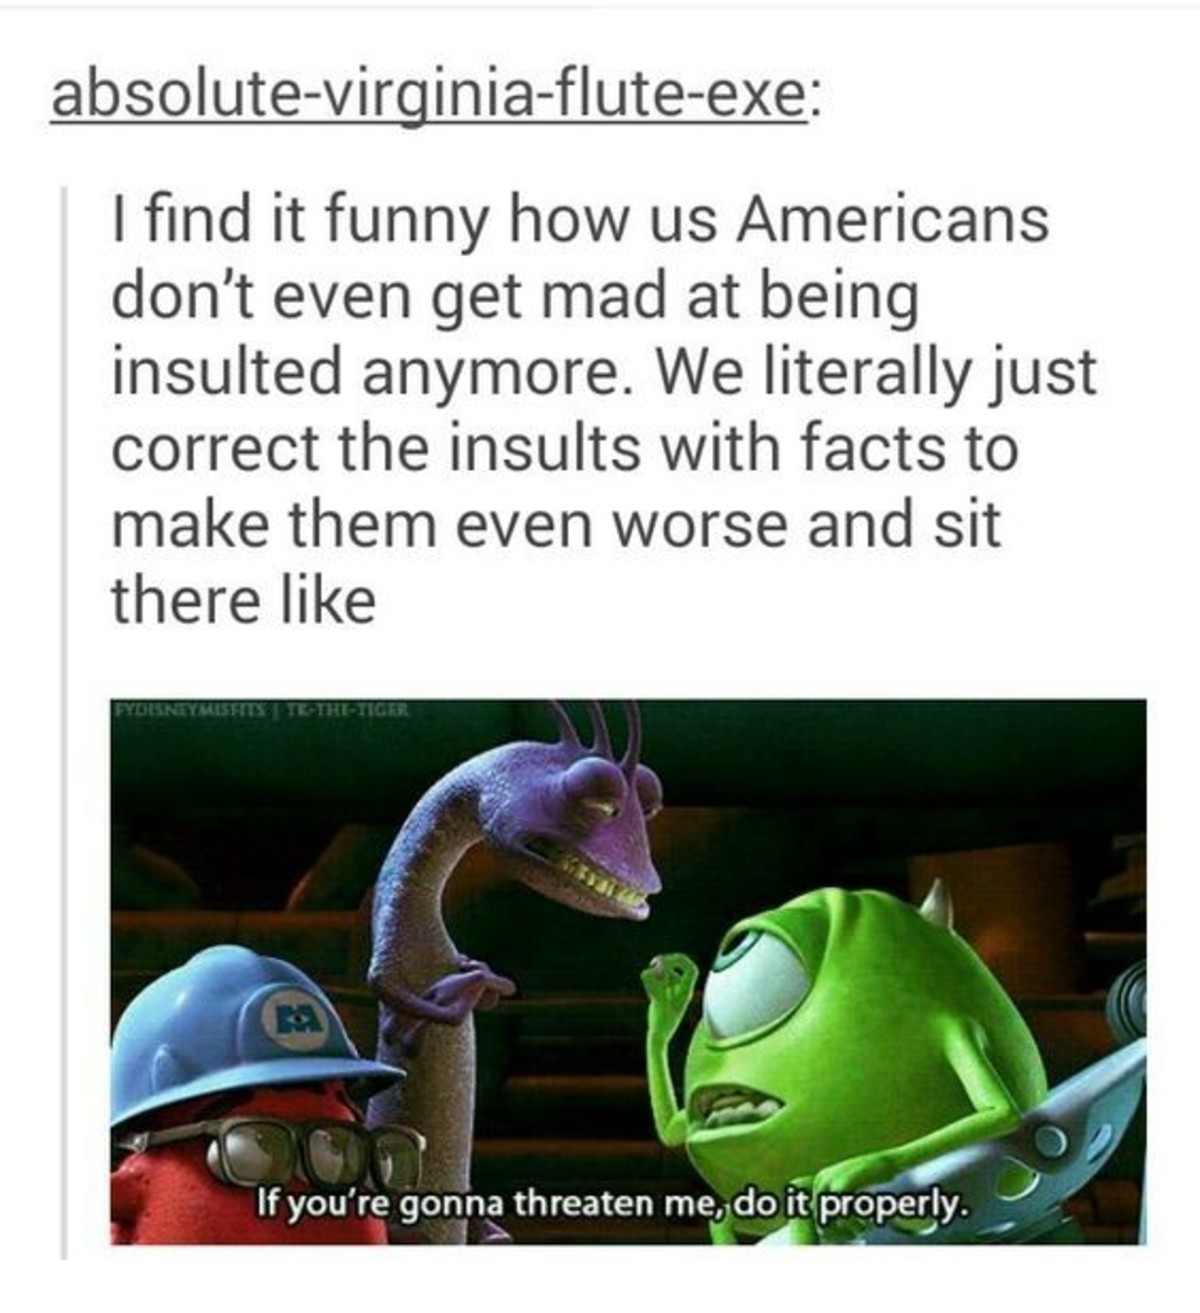 Americans. . I find it funny hnvg us Americans don' t even get raad at being insulted anymore. / hit literally just correct the insults with facts to make them 